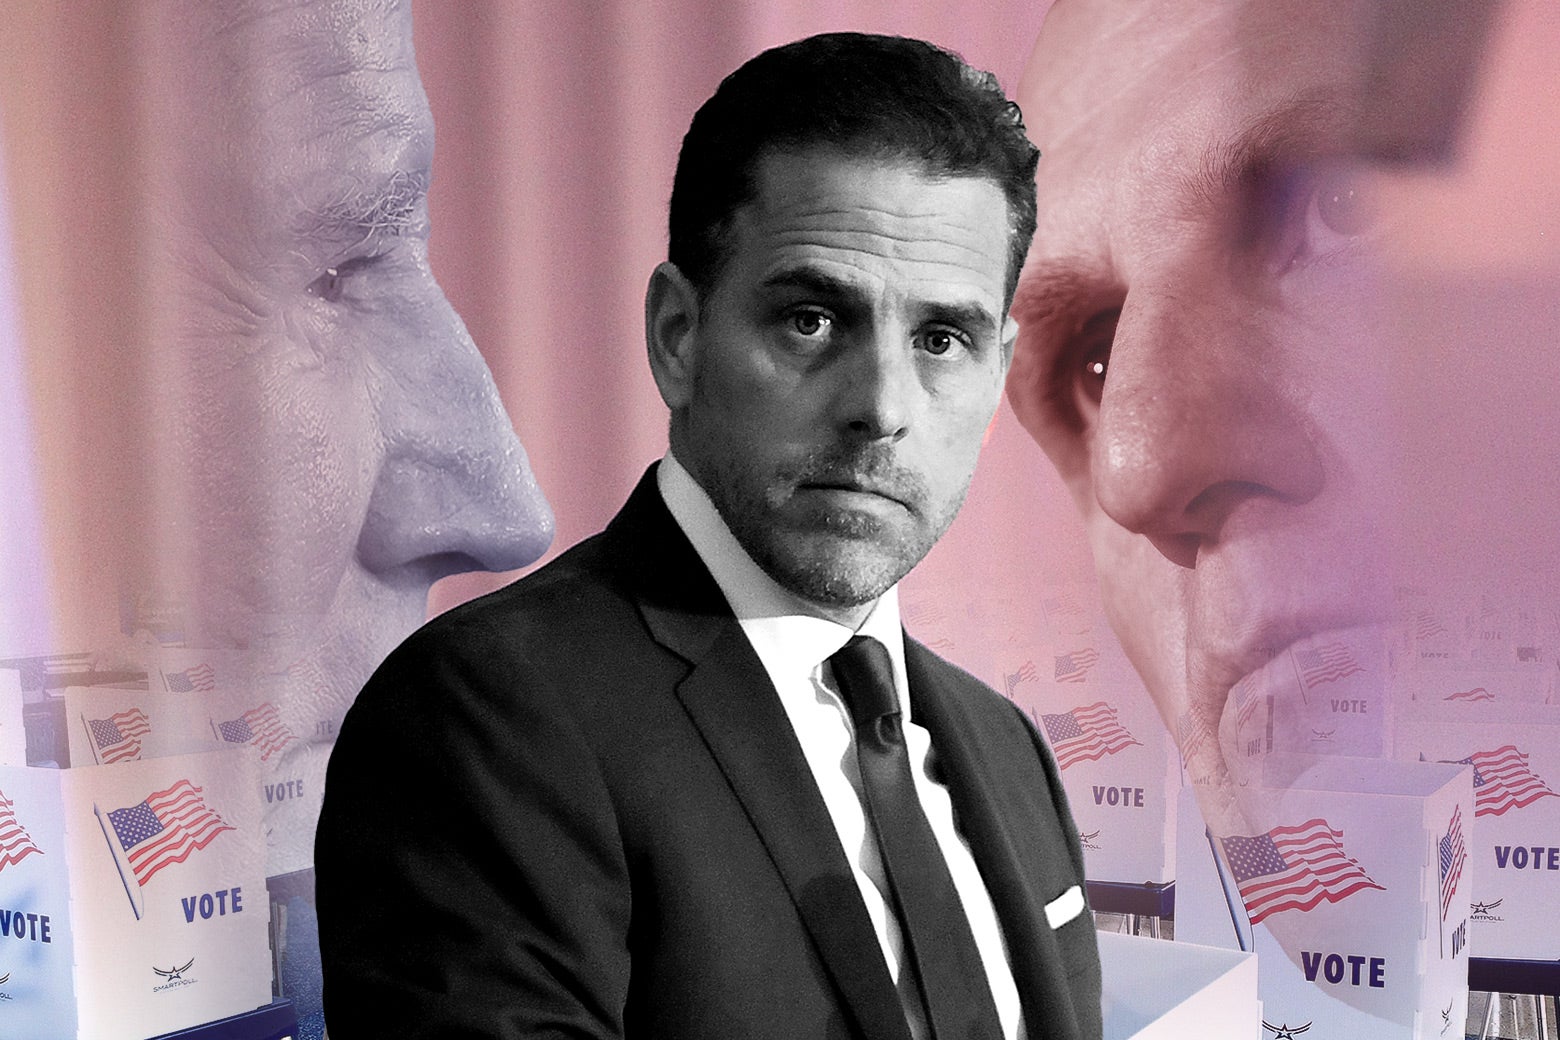 Hunter Biden in court today The presidents son is a thorny problem for Democrats. photo image